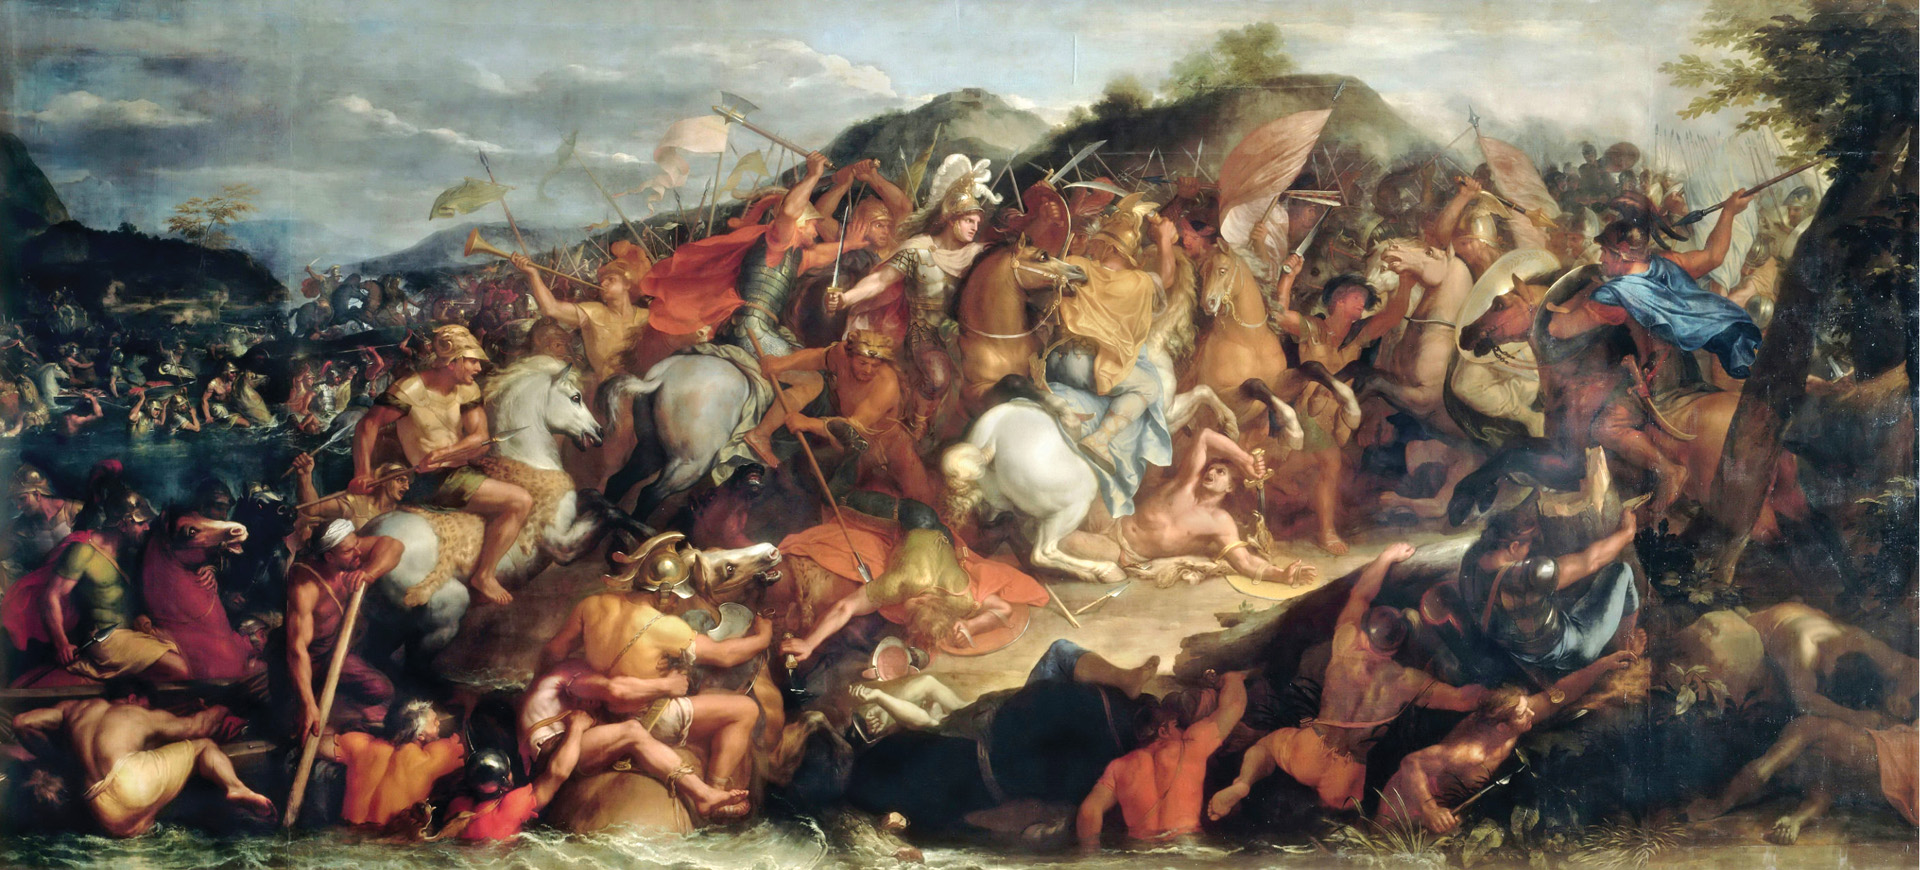 At the Battle of Granicus in 334 bc, Alexander defeated the forces of the Persian satraps of Asia Minor. Afterward, Alexander captured the coastal cities, which supplied his army while denying the Persian fleet a place to land and resupply.